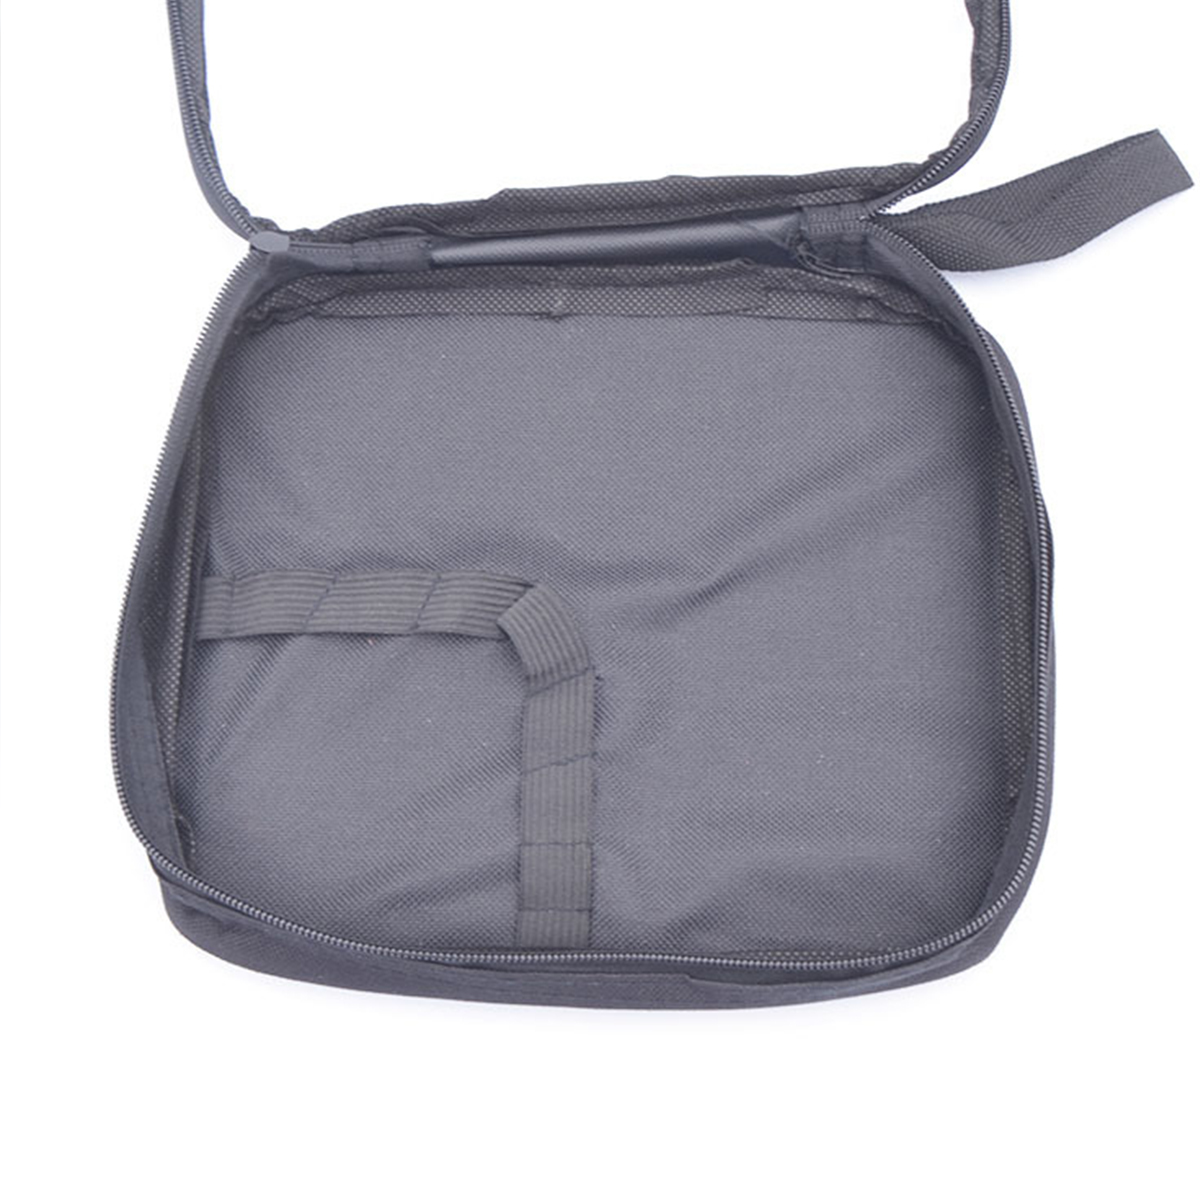 Portable-Tool-Bag-Pouch-Organize-Canvas-Storage-Bag-Small-Parts-Hand-Tool-Plumber-1557725-5